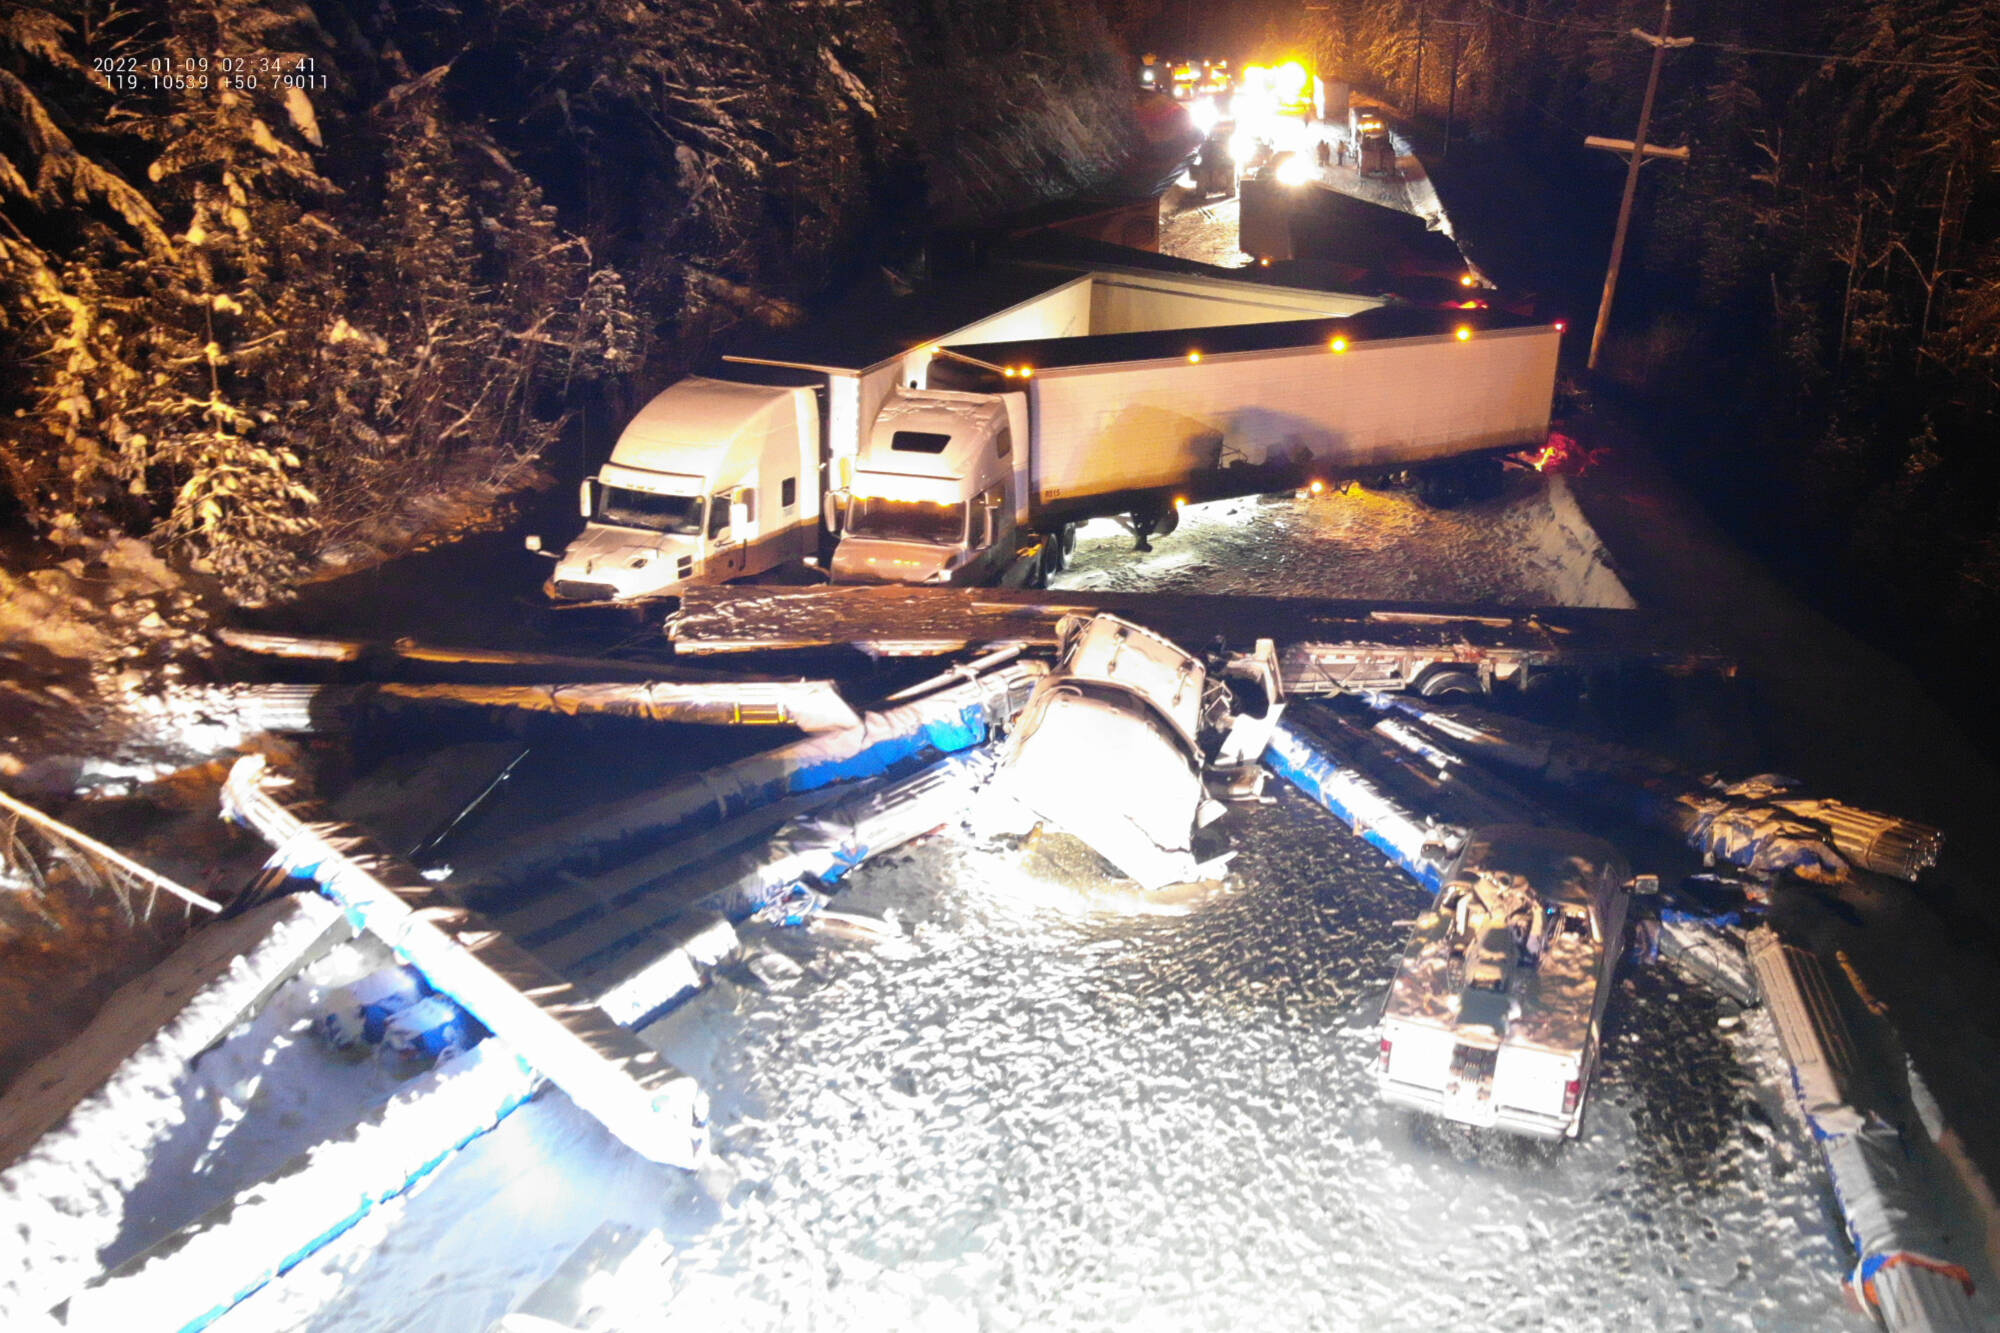 Several commercial tractor trailer units can be seen in this RCMP drone image of the Saturday, Jan. 8, collision on Highway 1 between Sicamous and Salmon Arm. Police are seeking more information about the incident that resulted in the death of one person and sent six others to hospital. (RCMP photo)